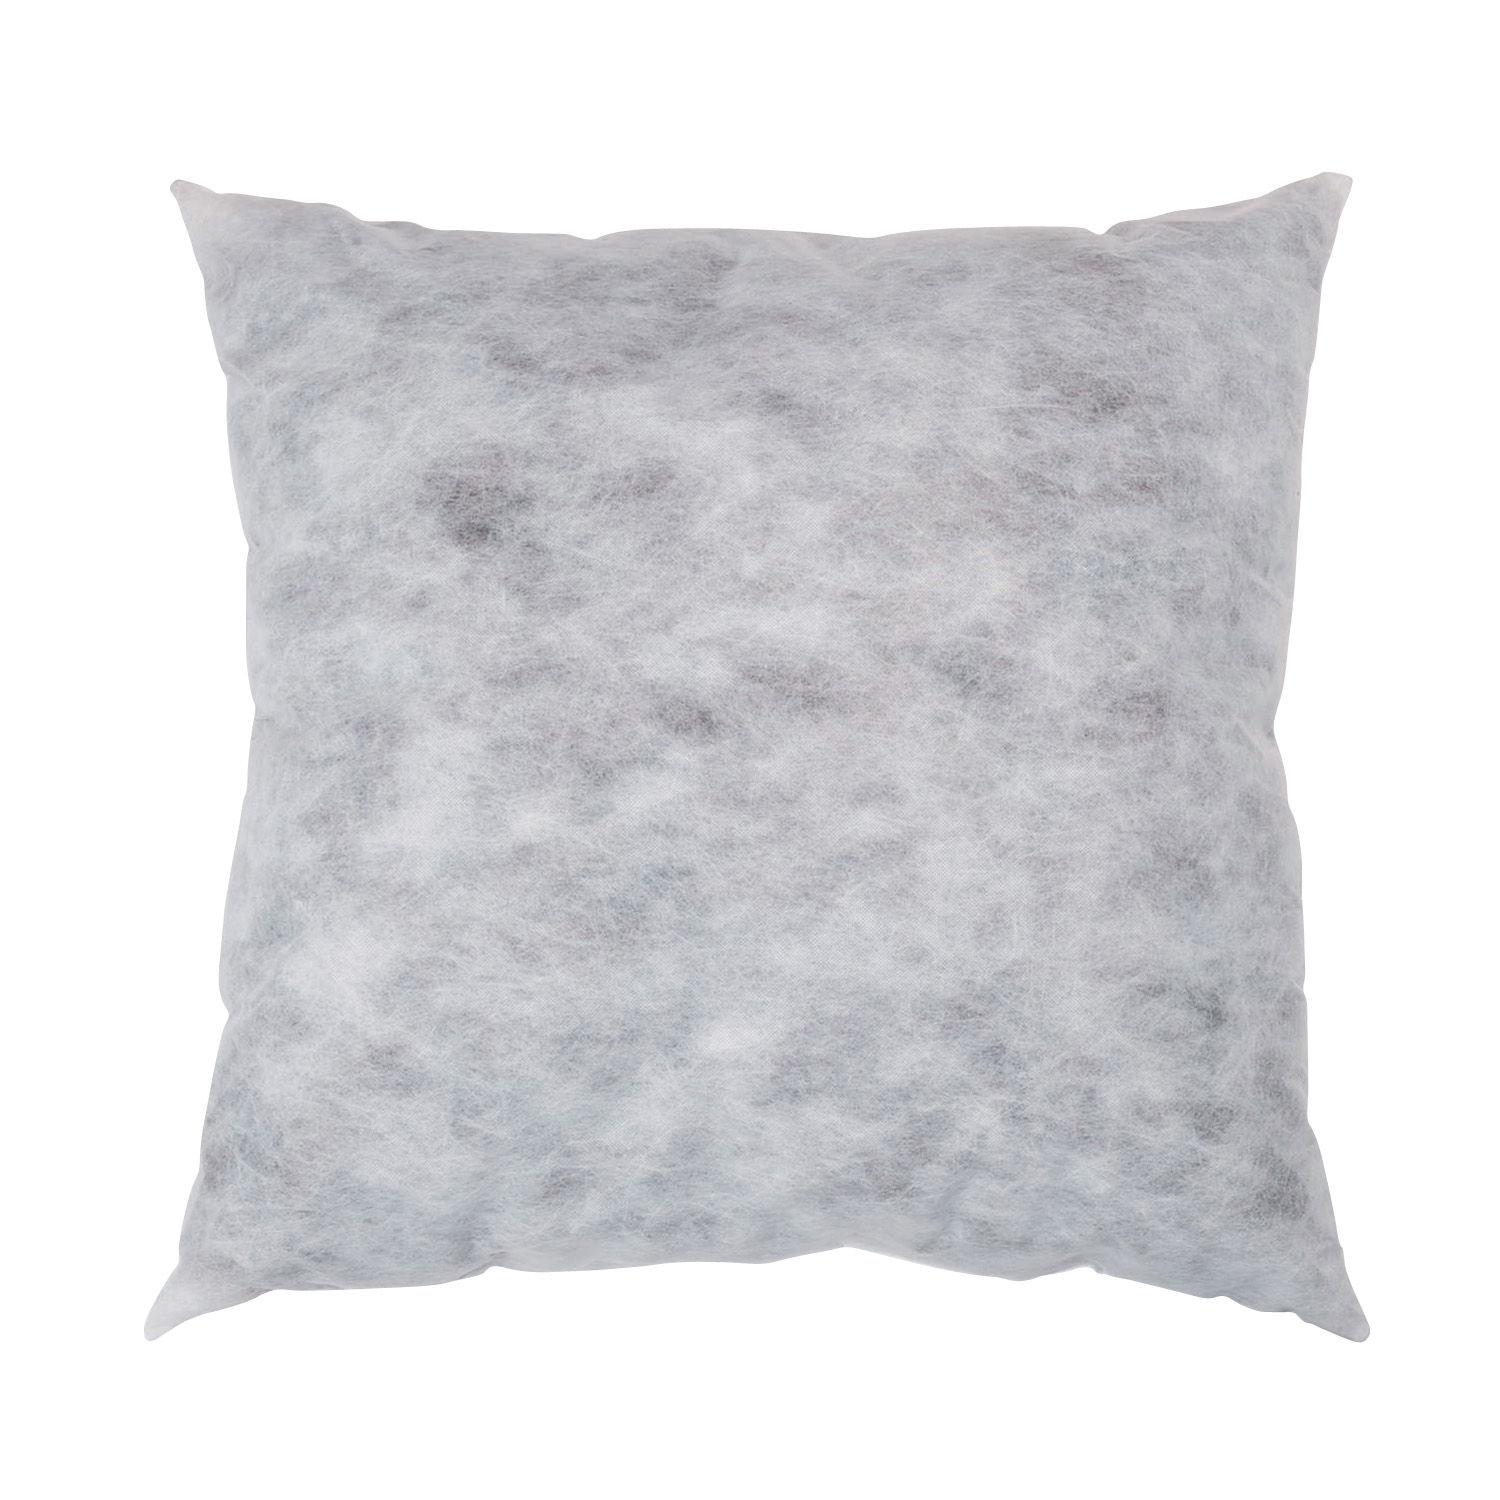 White Non-woven Polyester 30x30-inch Pillow Insert